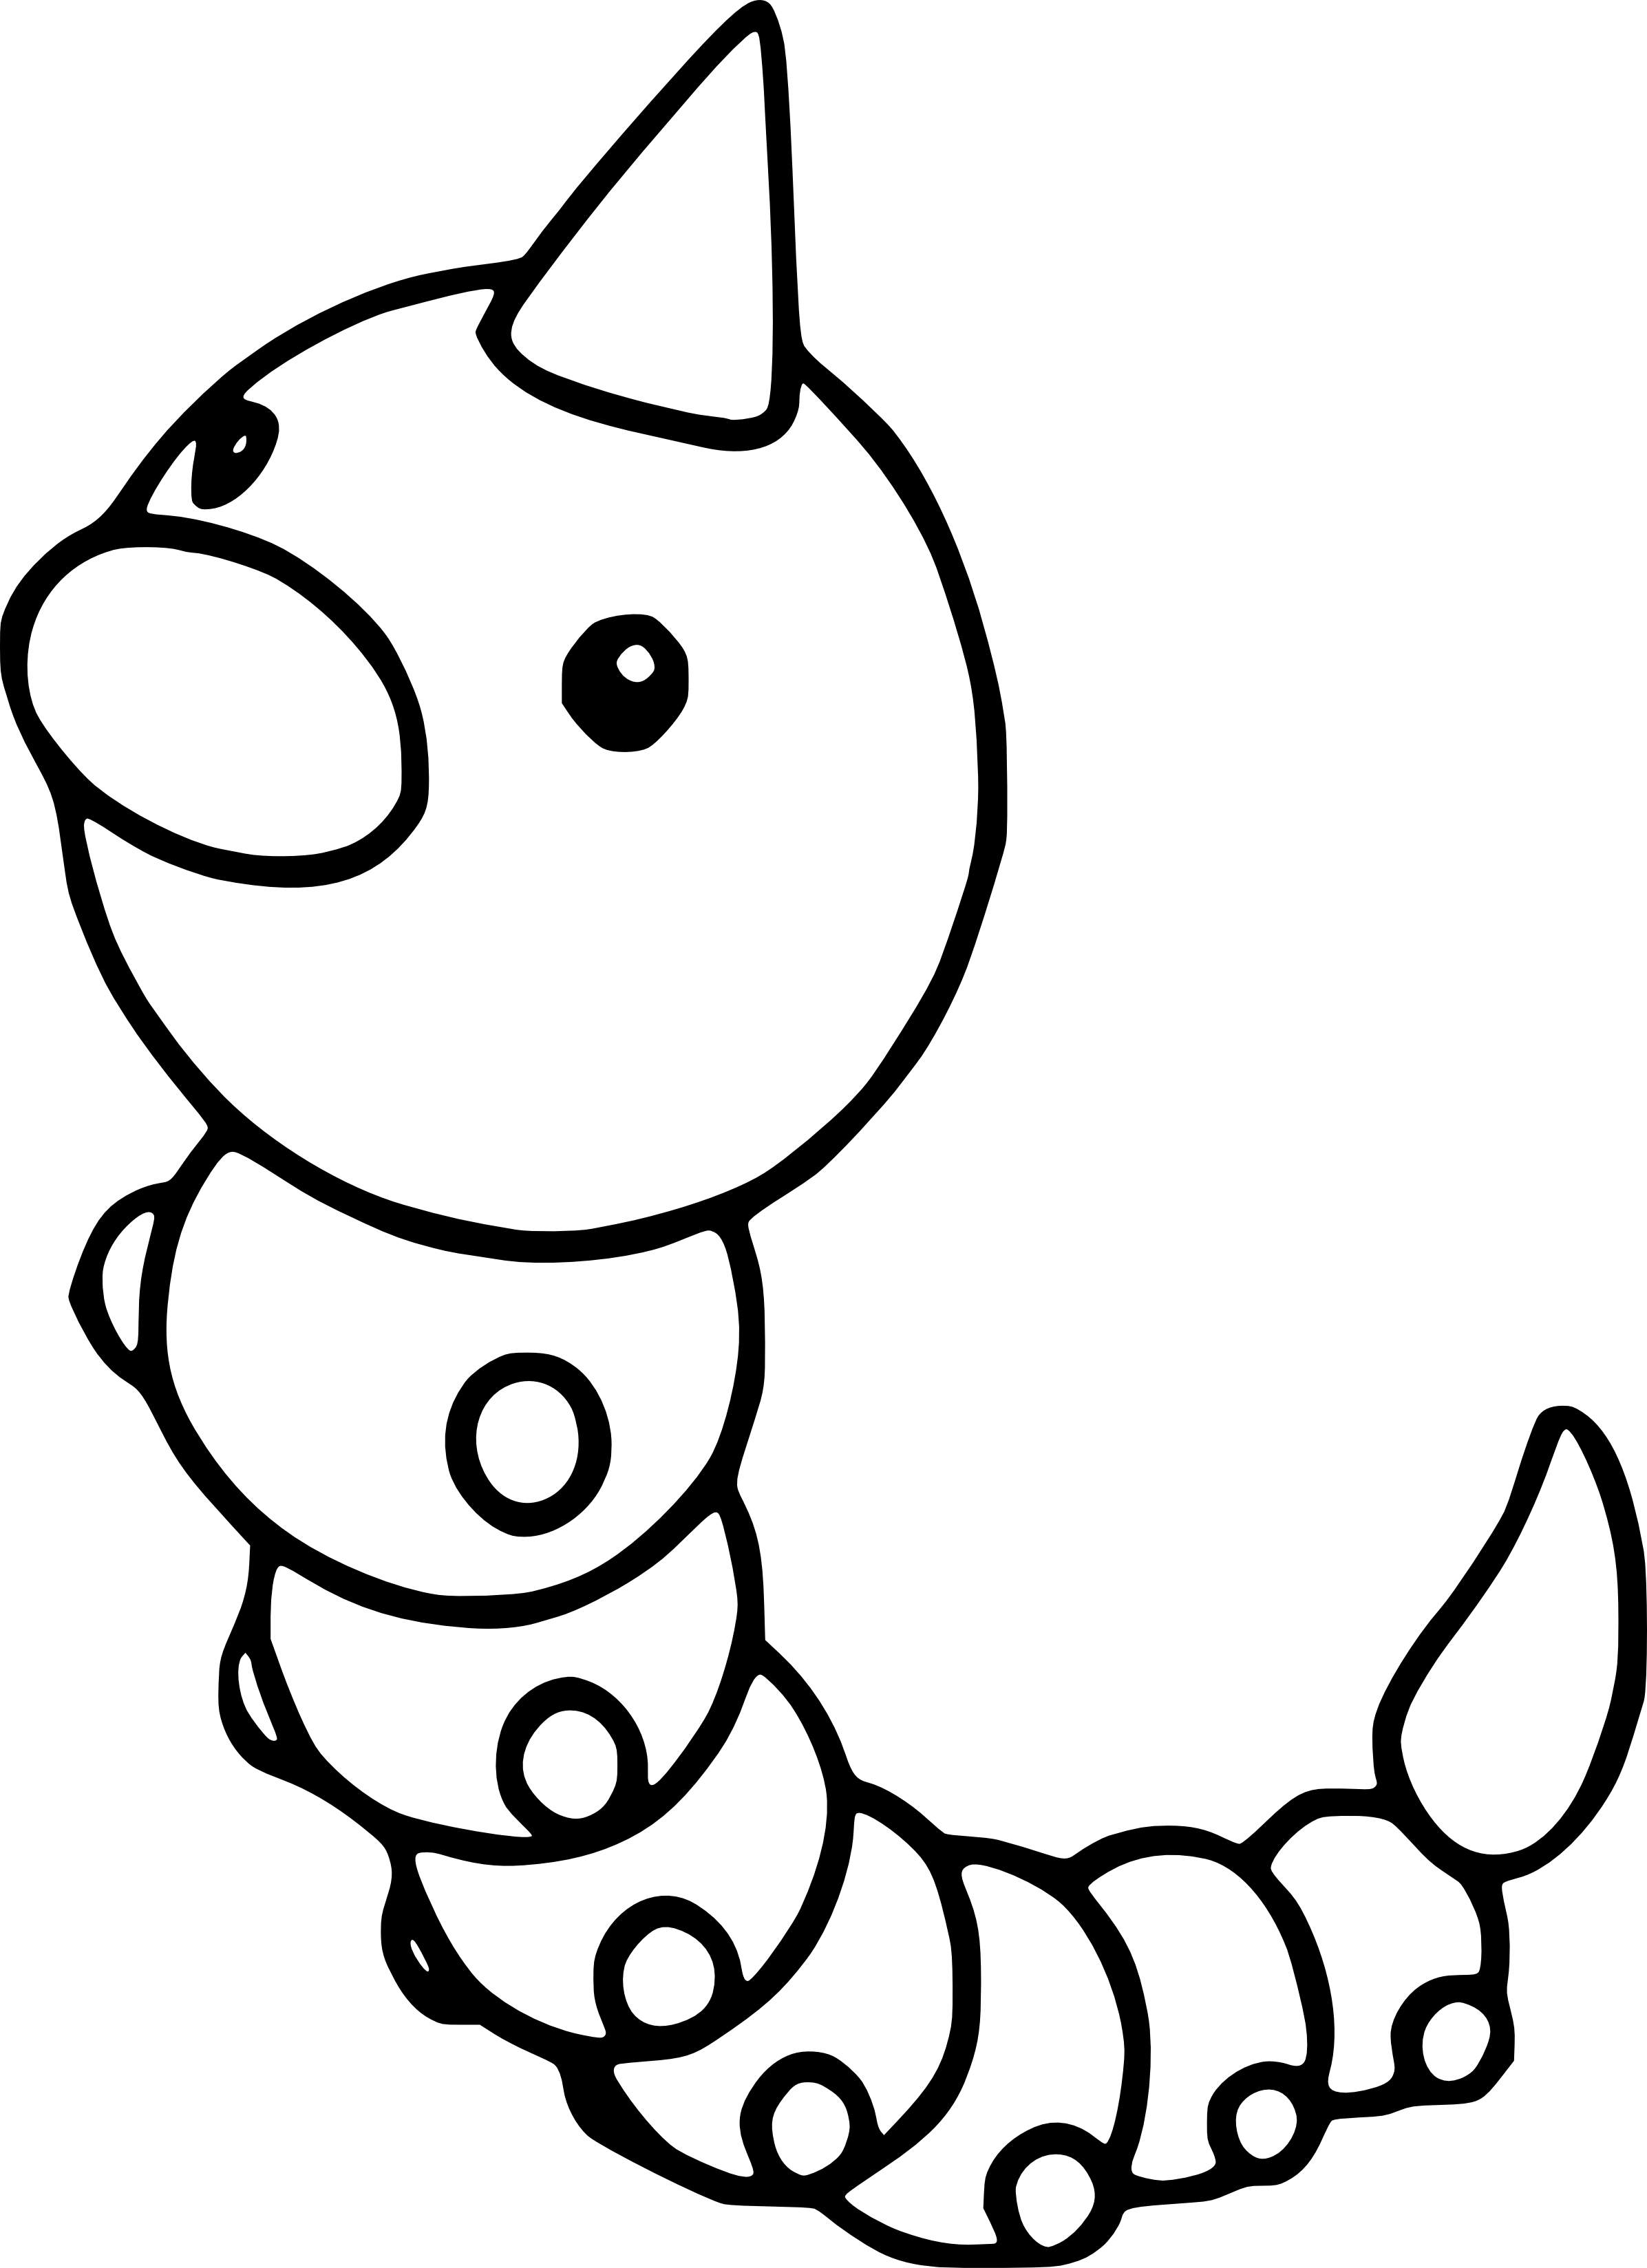 Weedle Pokemon coloring page